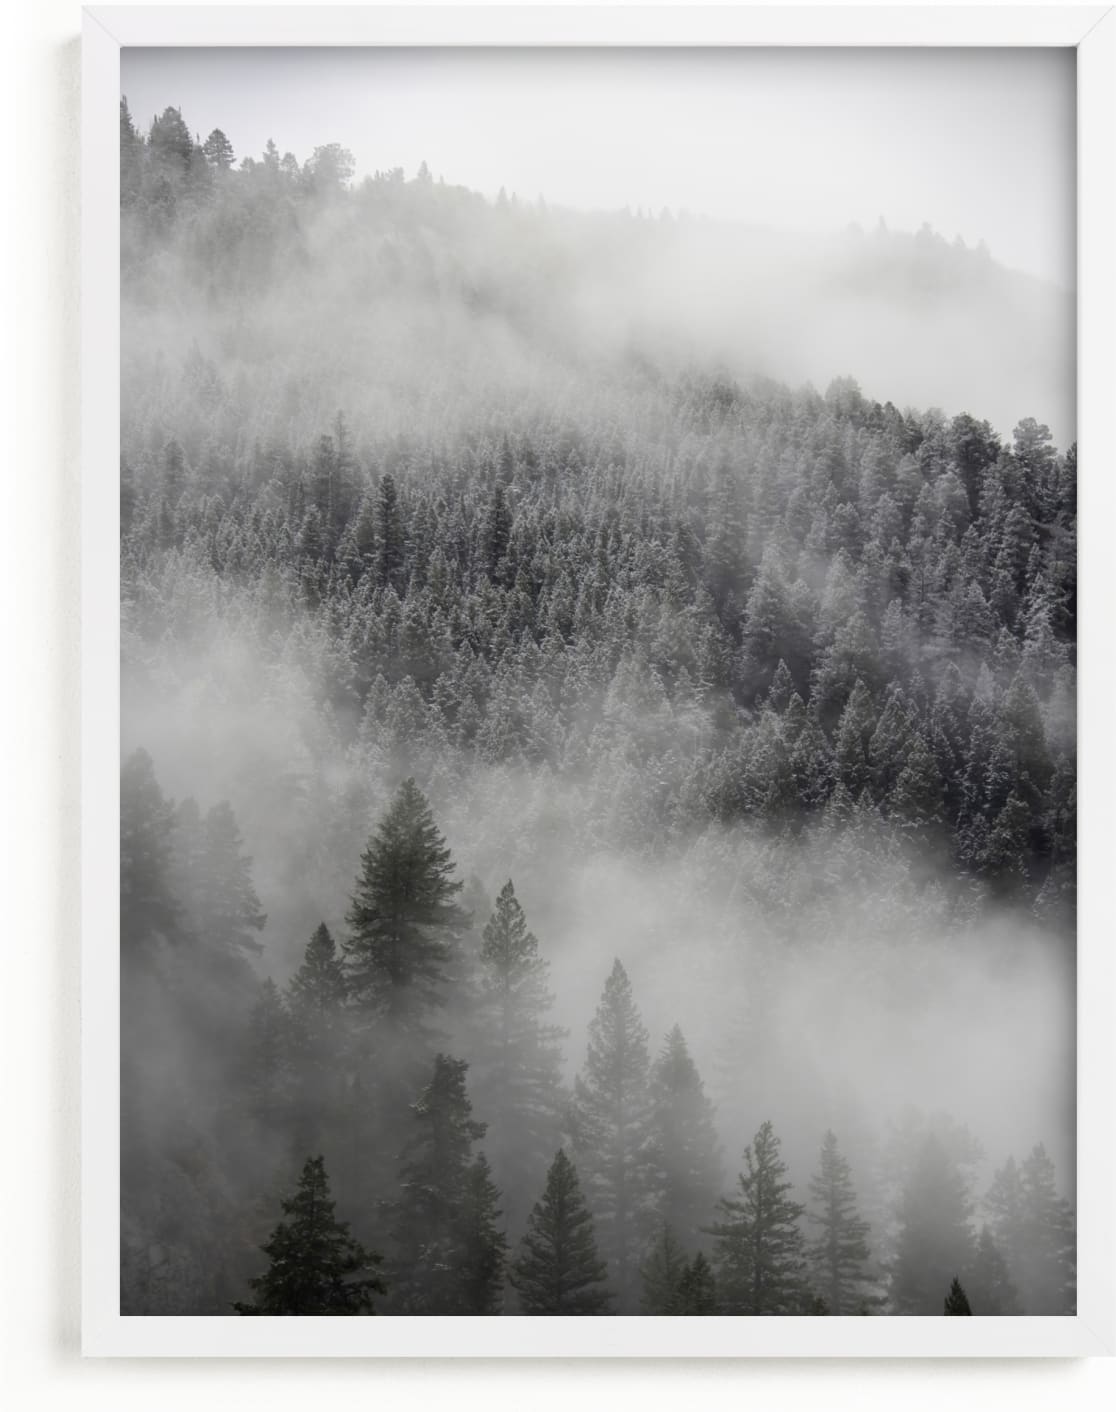 This is a grey art by Jenna Holcomb called Into the Fog.